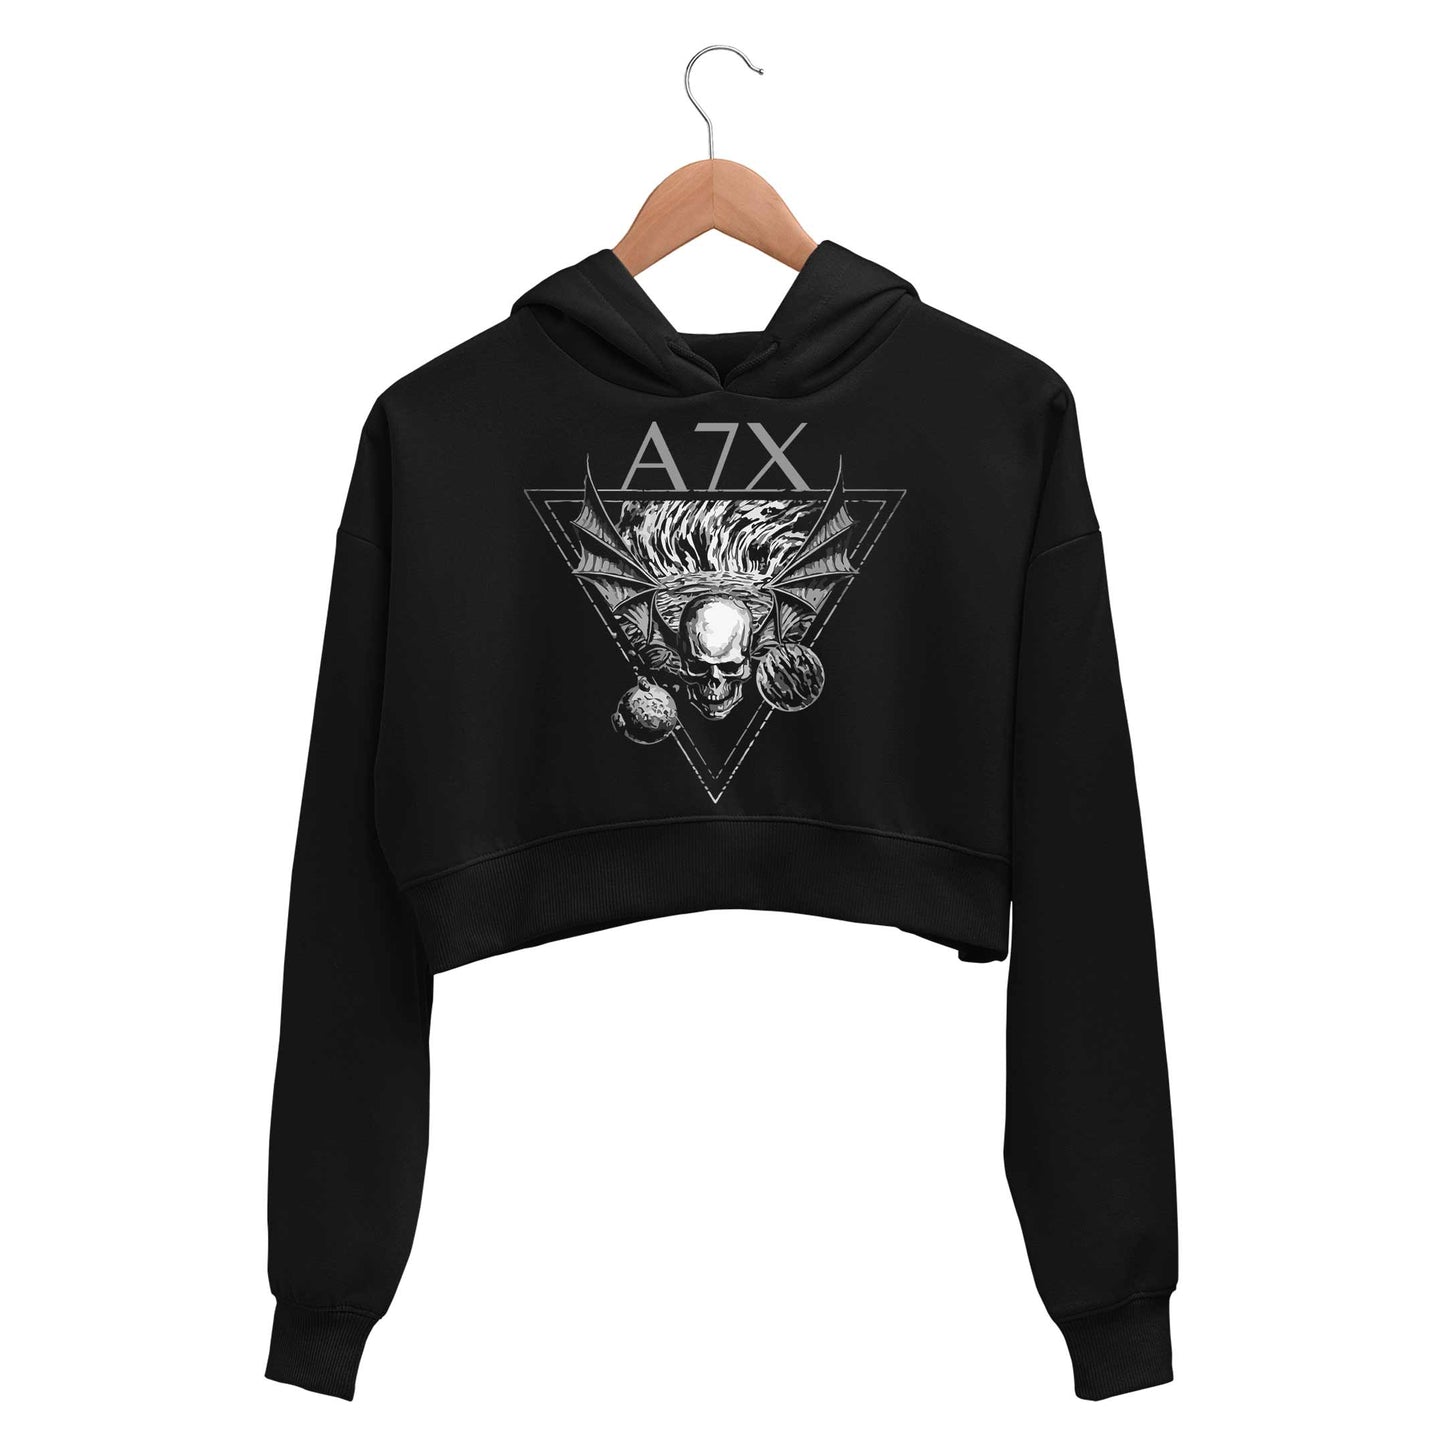 Queen Crop Hoodie - On Sale - XS (Chest size 32 IN)